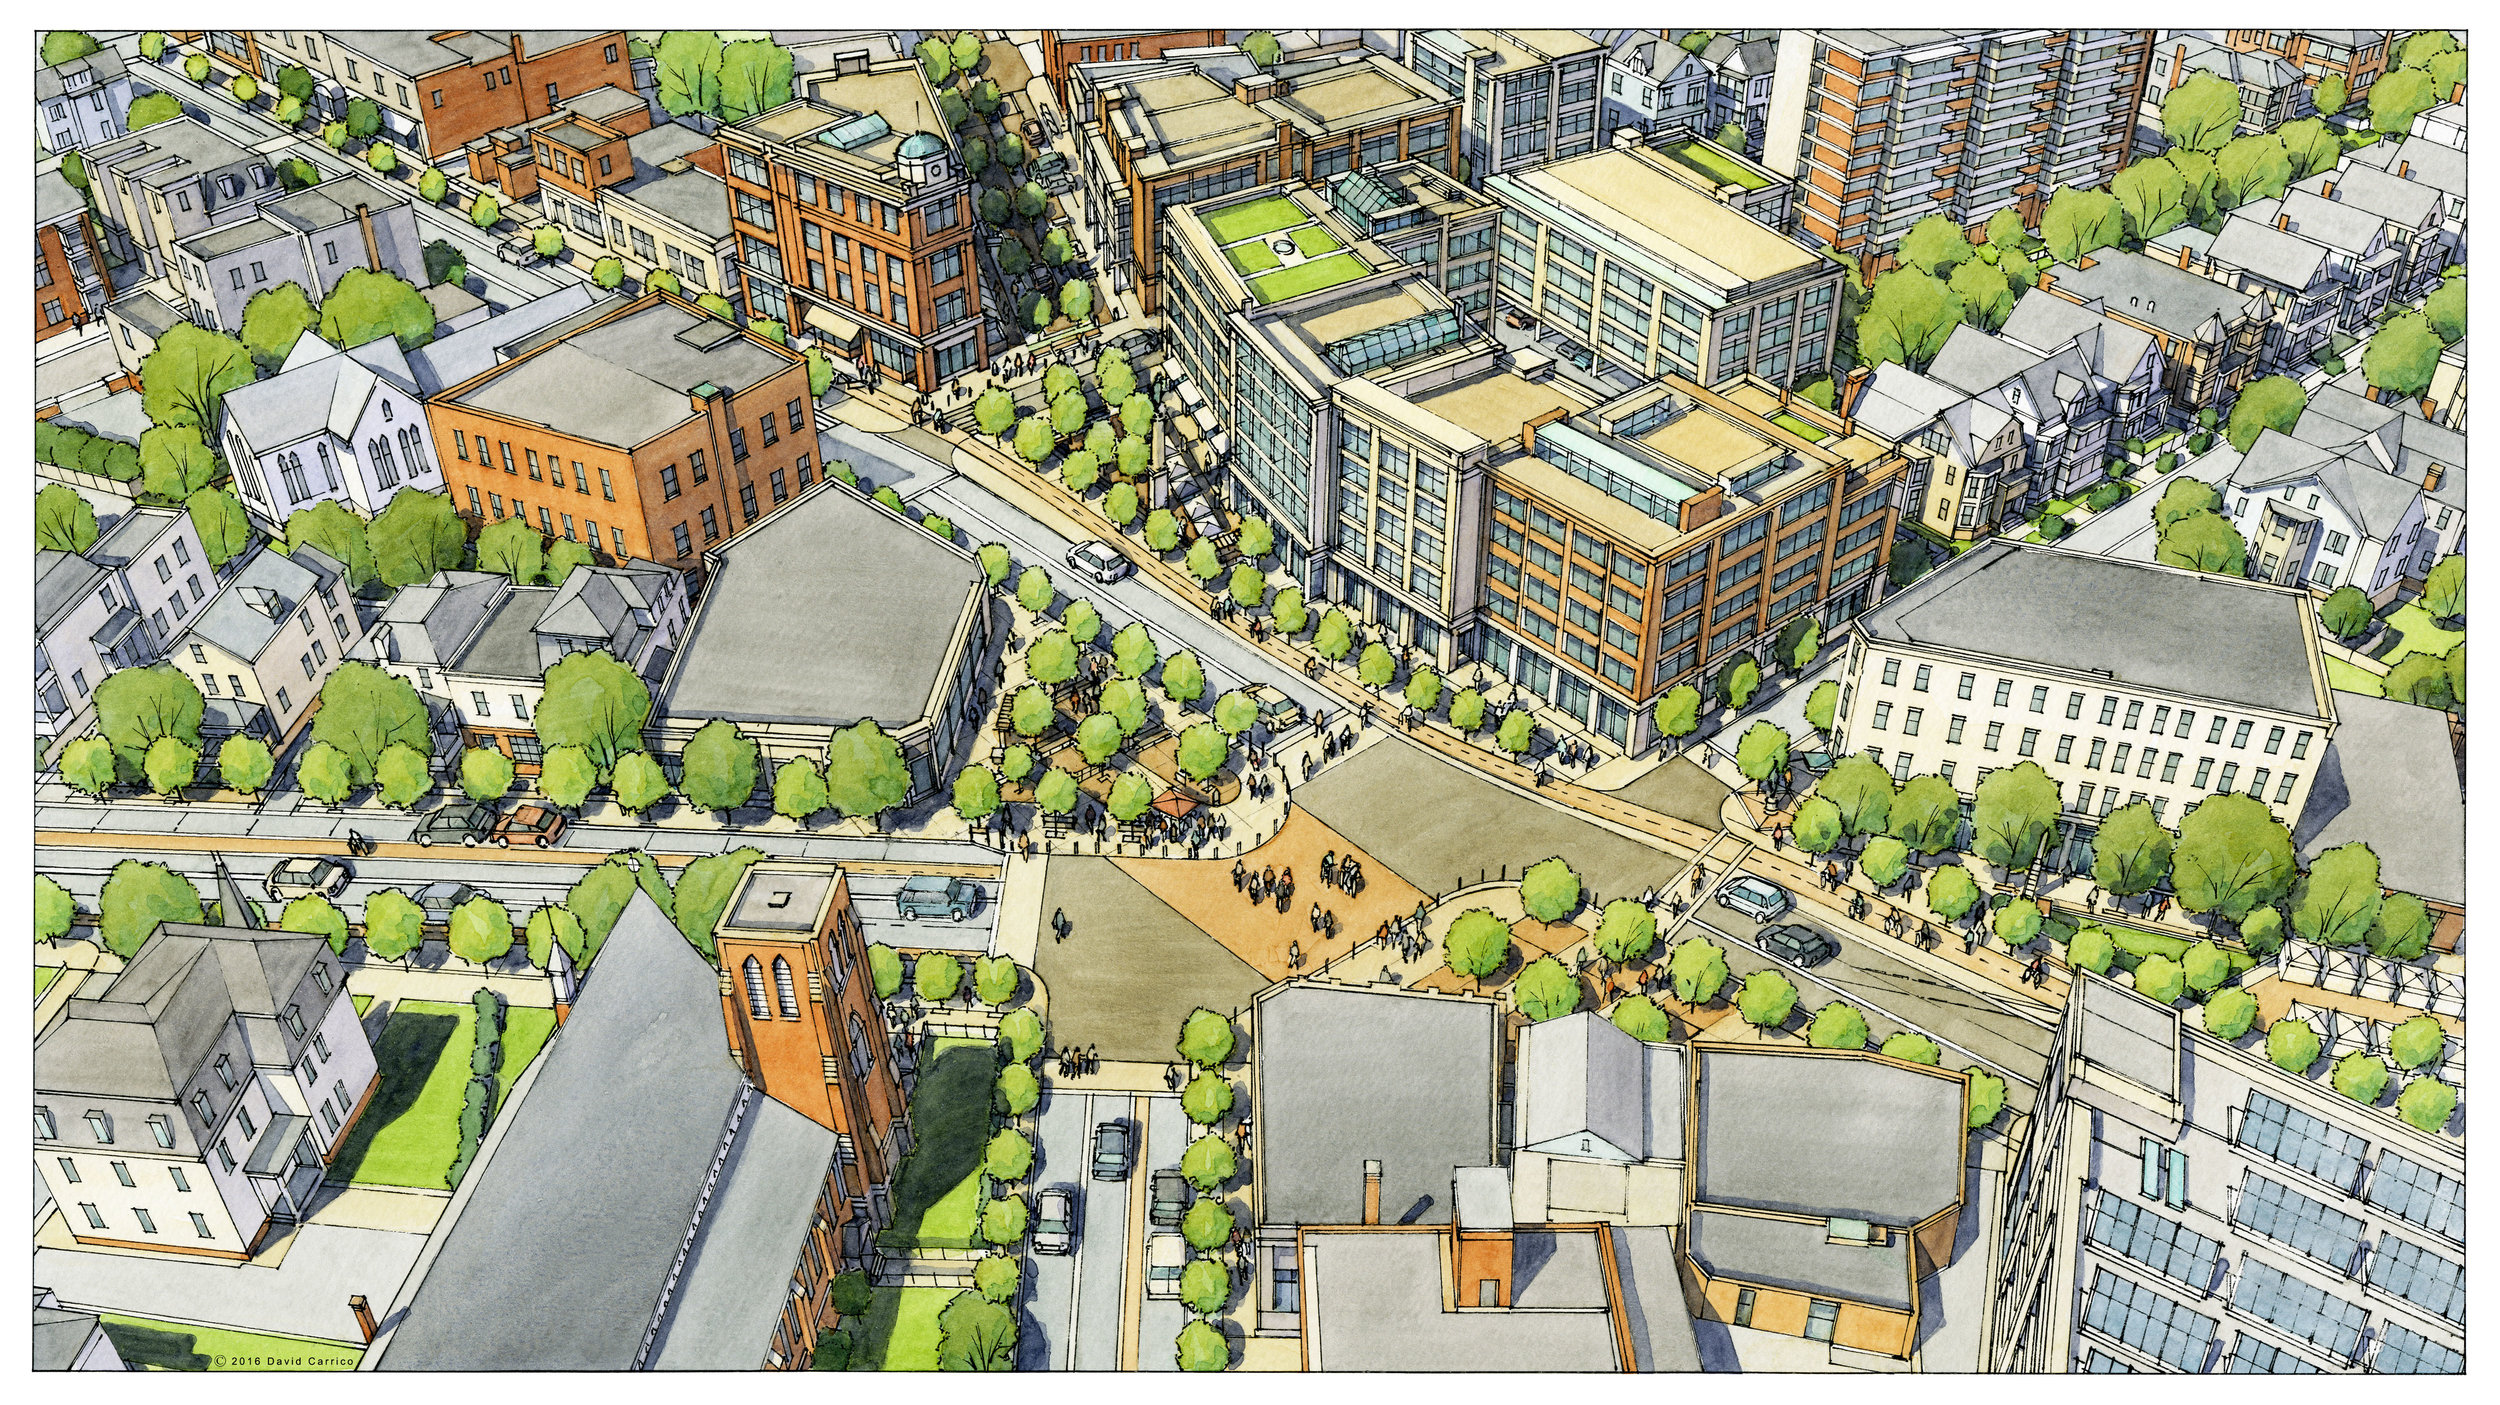 Union-Square-Somerville-Ave-Intersection-Birdseye-Proposed.jpg